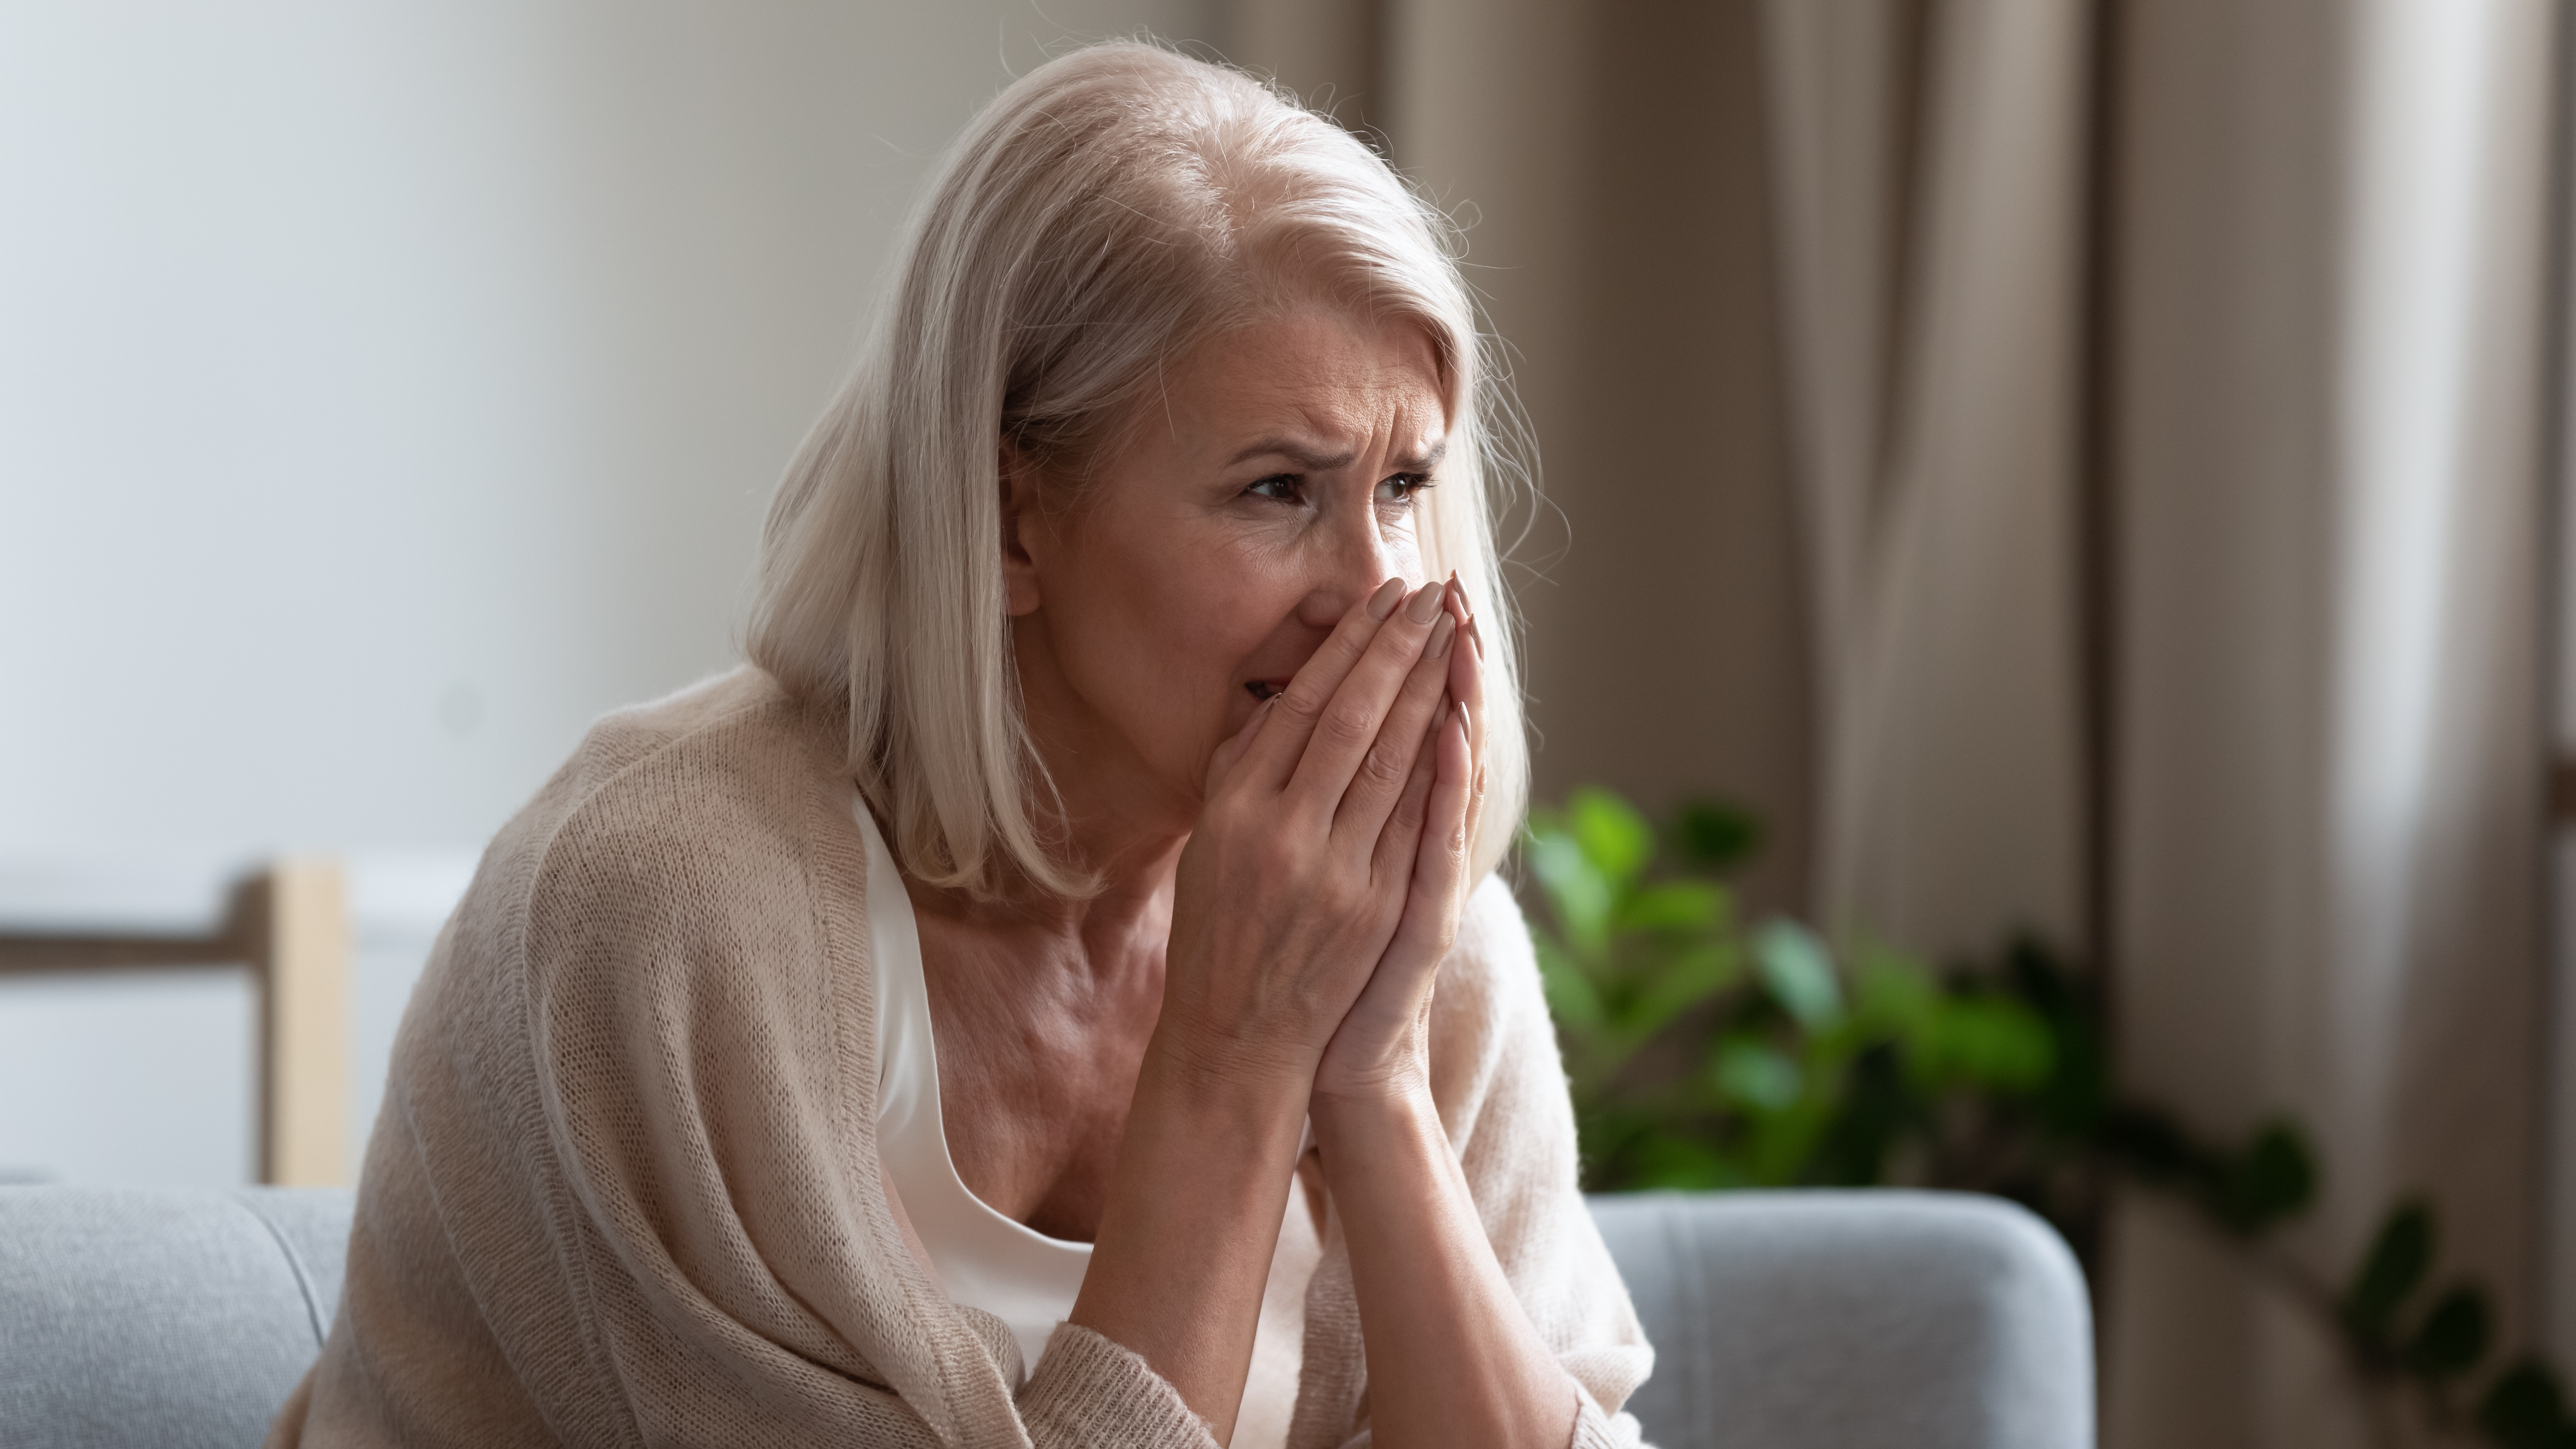 Worried senior woman sitting on a couch | Source: Shutterstock